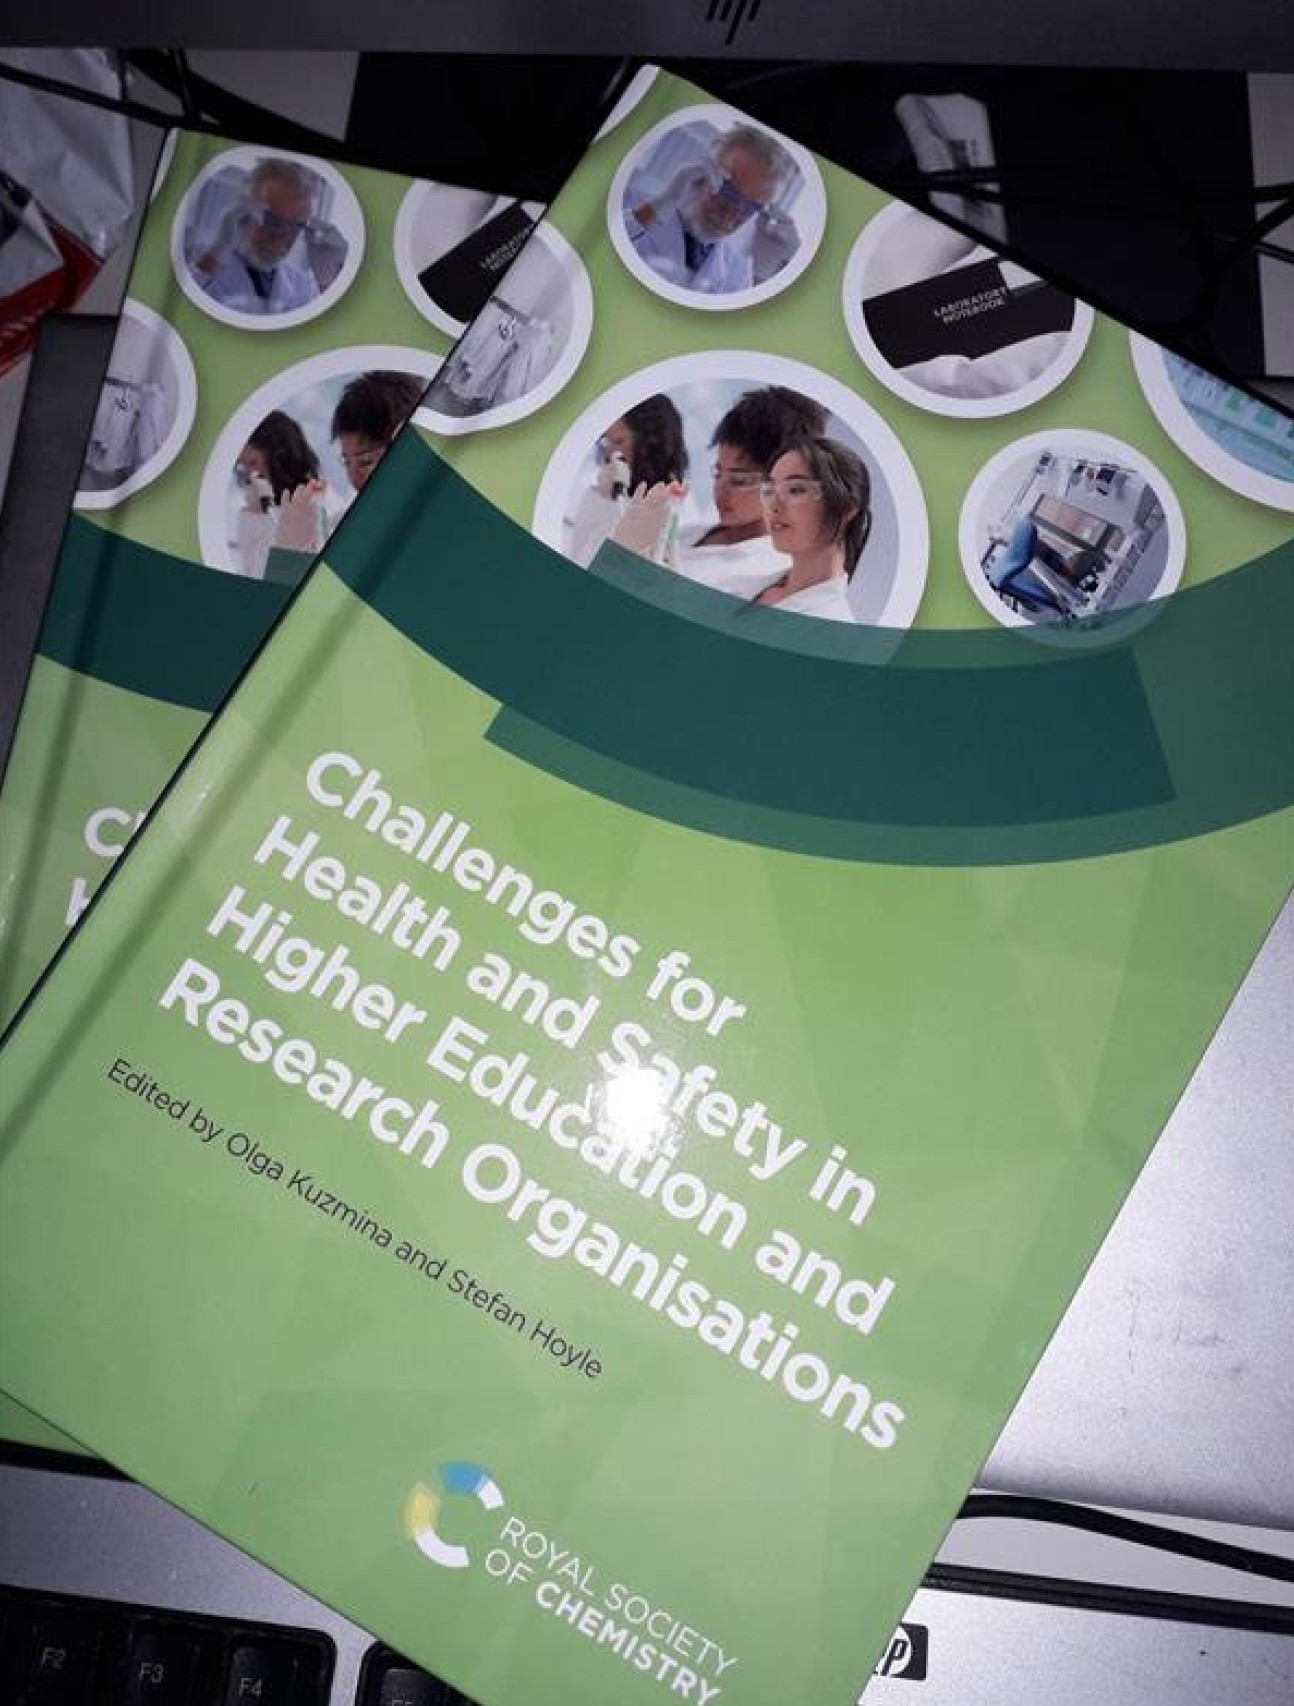 The 'Challenges for Health ad Safety in HE and Research Organisations' document